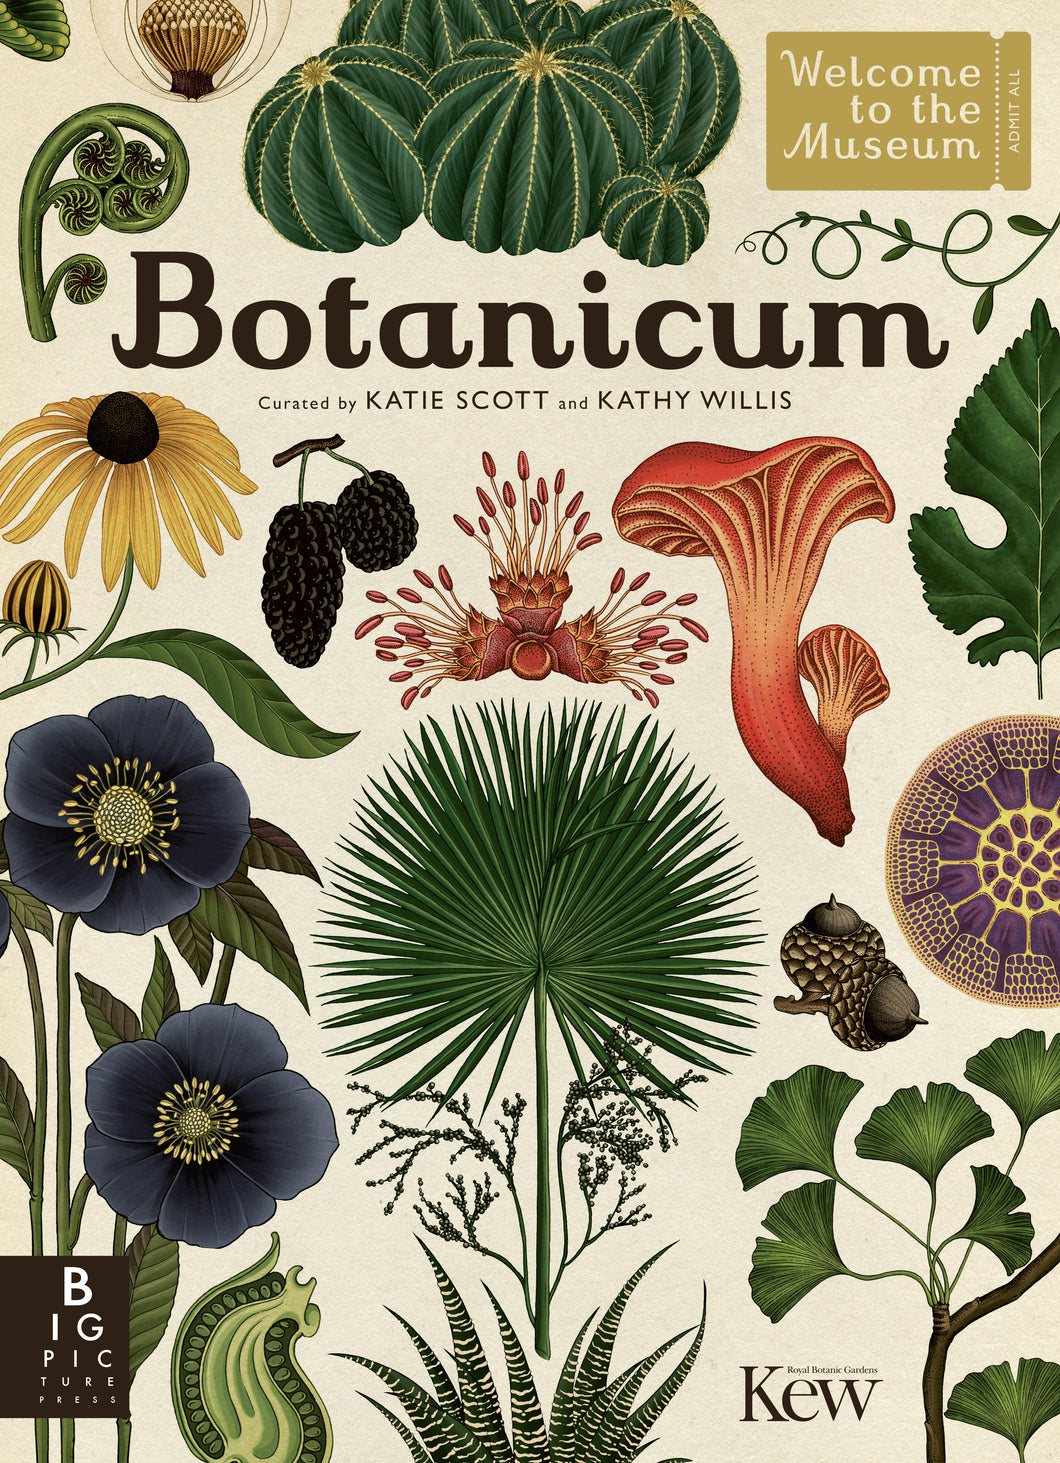 Book cover shows botanical drawings of plants. Cover reads 